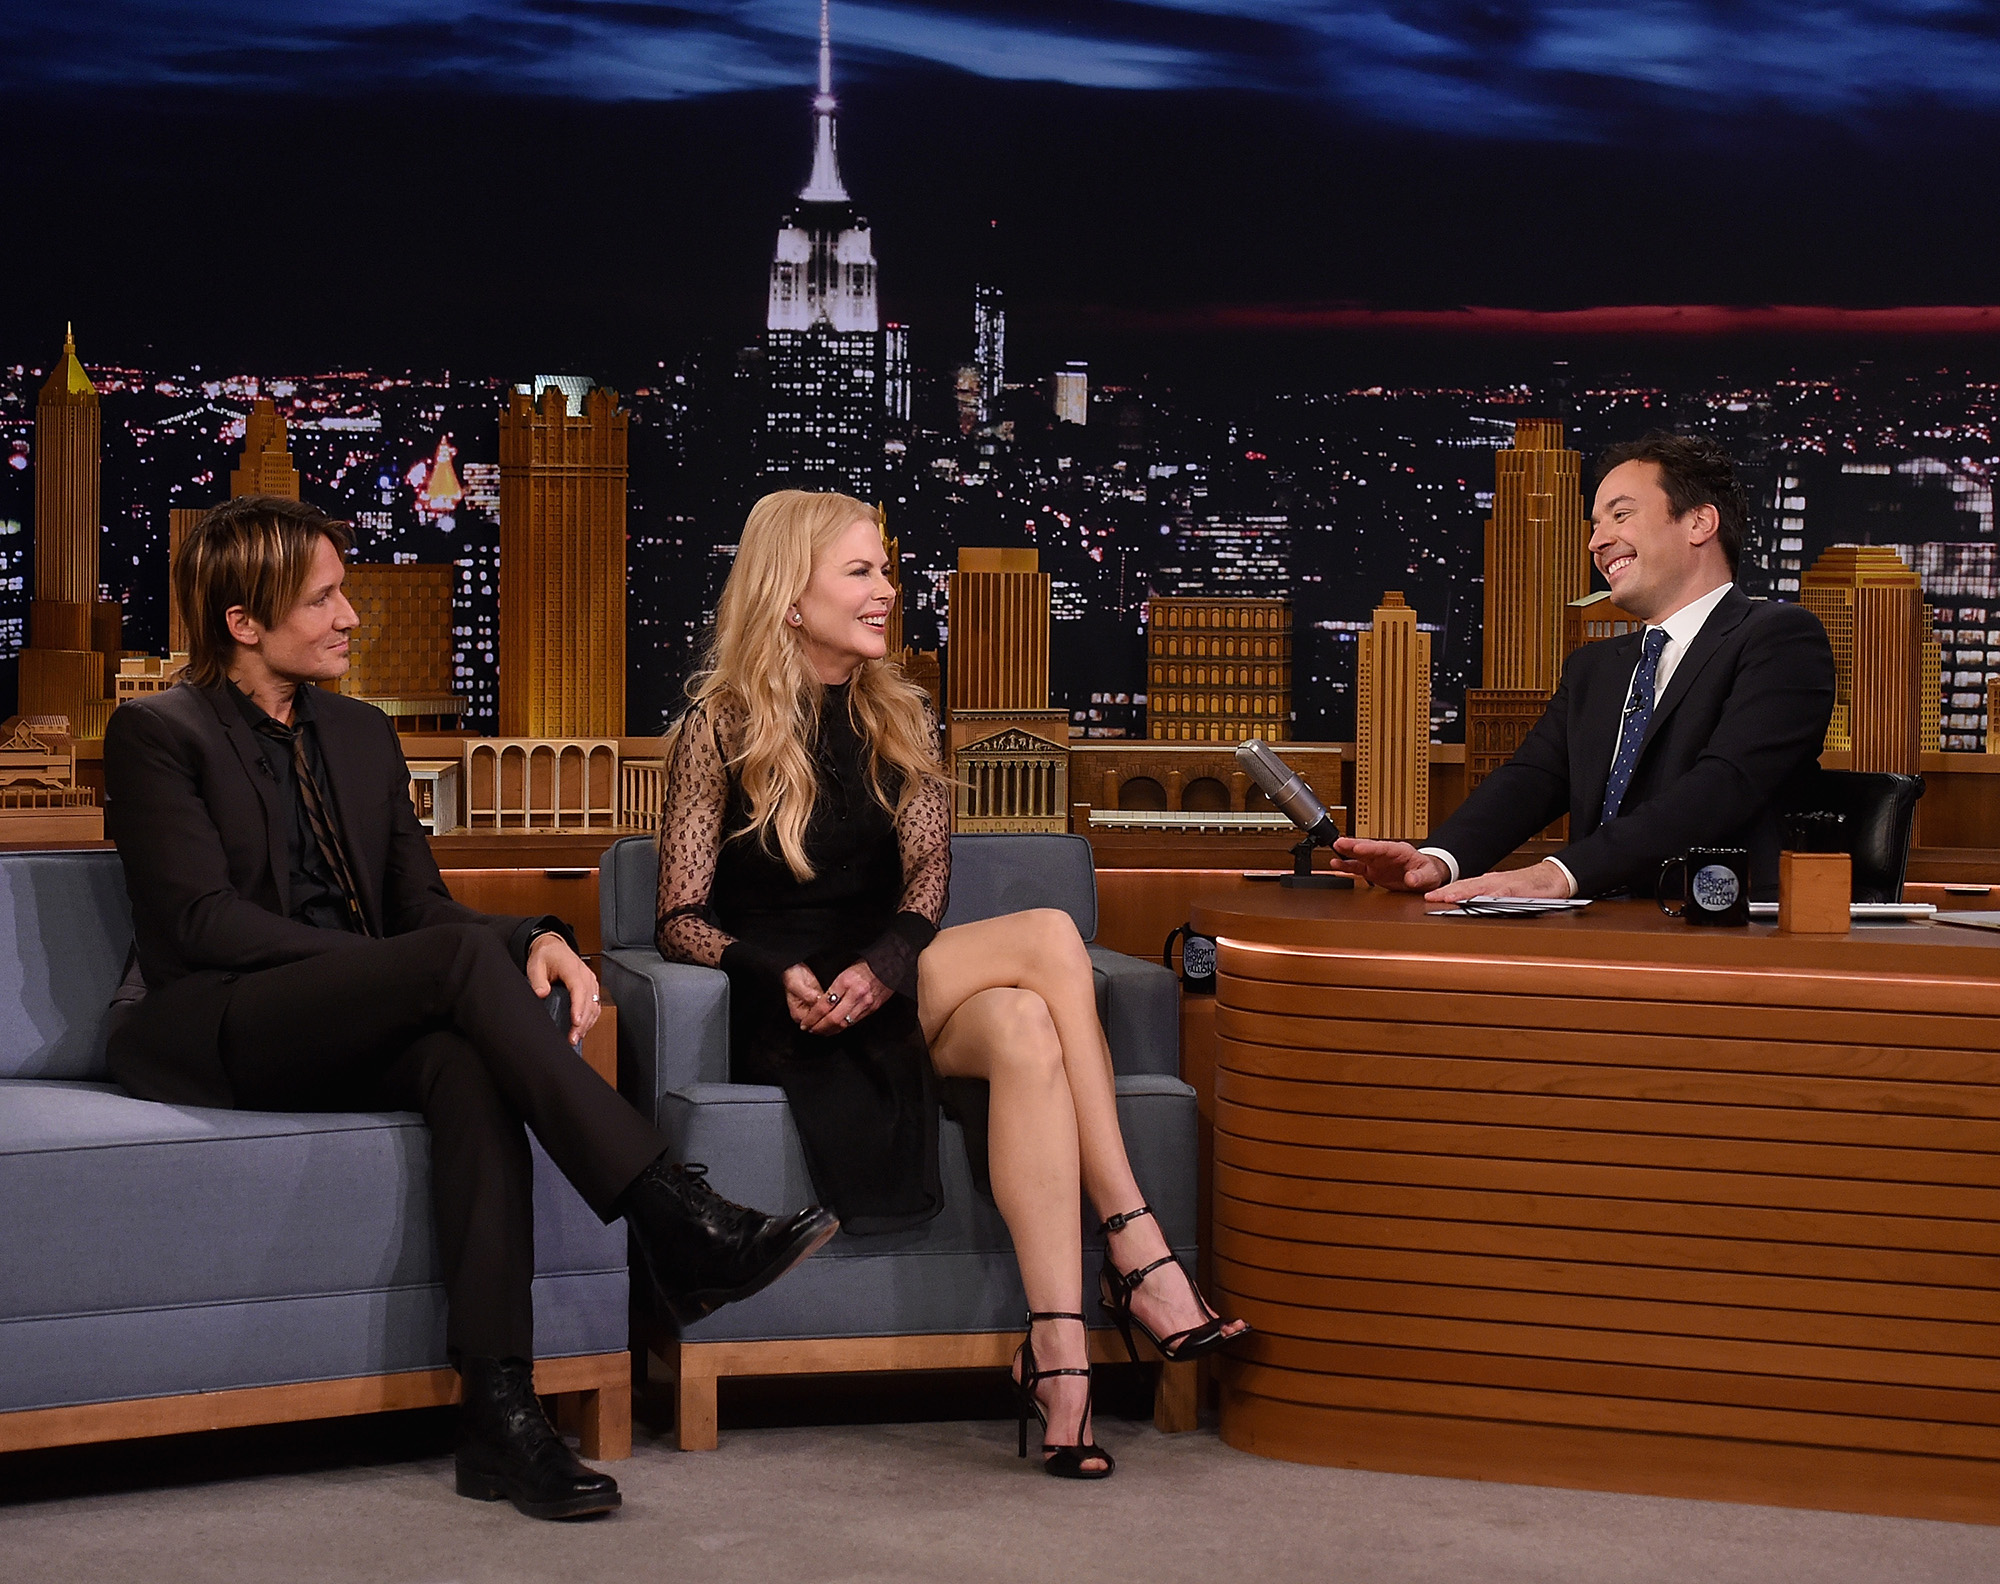 Keith Urban, Nicole Kidman and host Jimmy Fallon during a segment on "The Tonight Show Starring Jimmy Fallon" at Rockefeller Center on November 16, 2016 in New York City.  (Photo by Jamie McCarthy/Getty Images) (Jamie McCarthy&mdash;Getty Images)